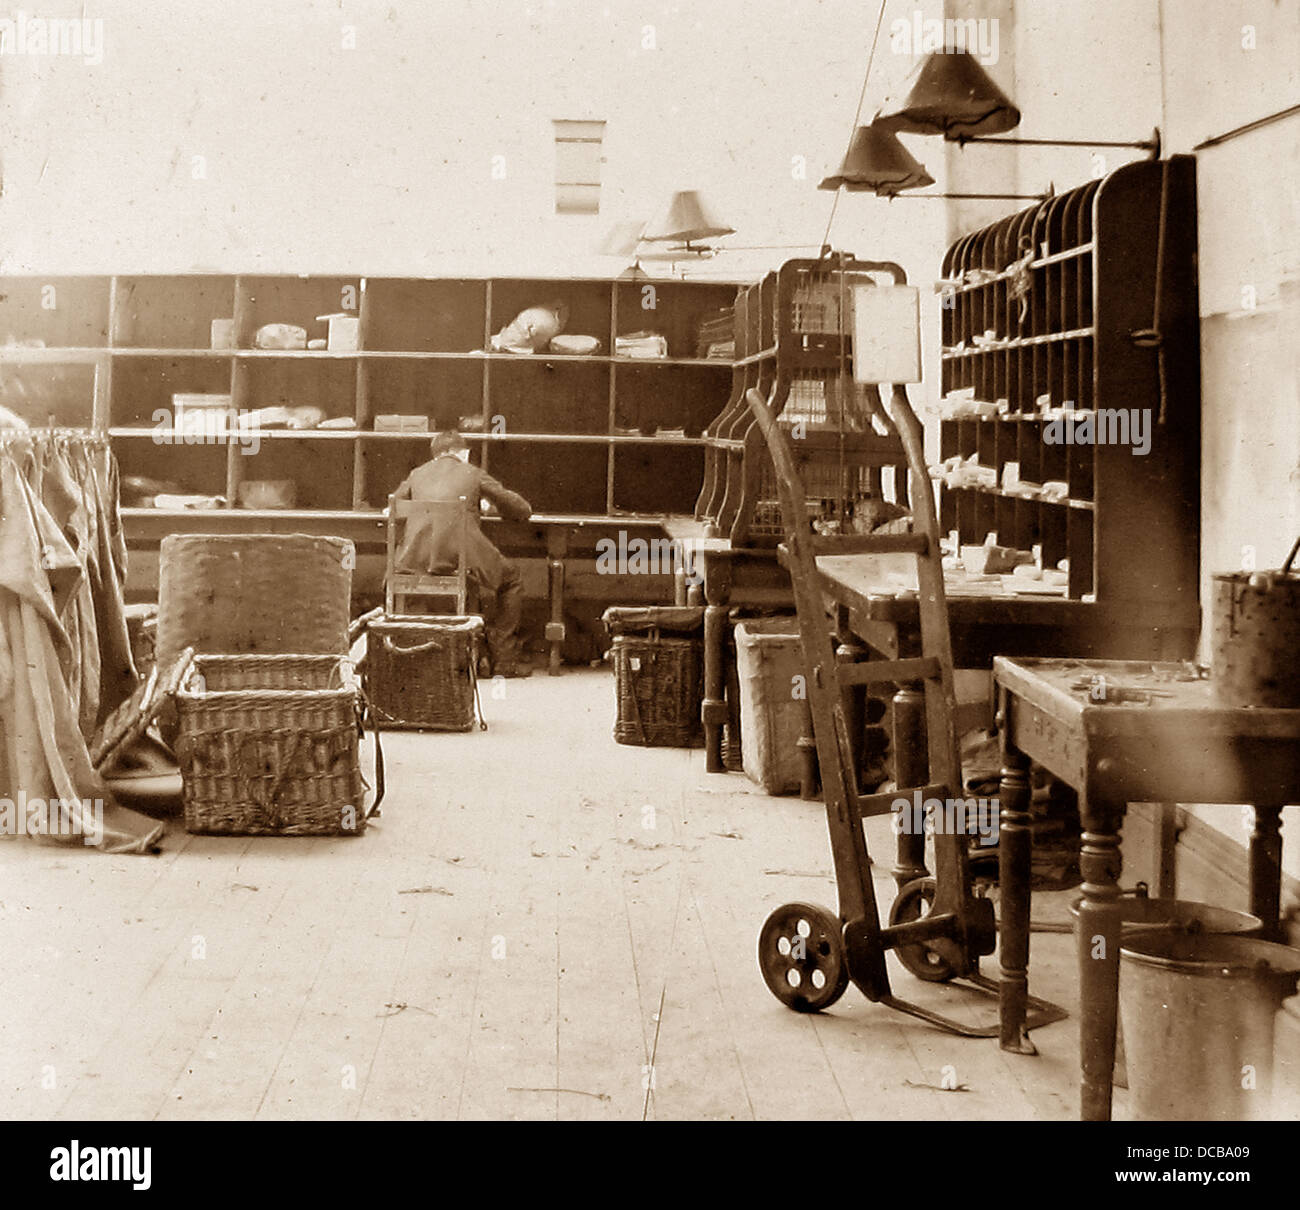 Post Office Parcel Sorting Room Victorian period Stock Photo